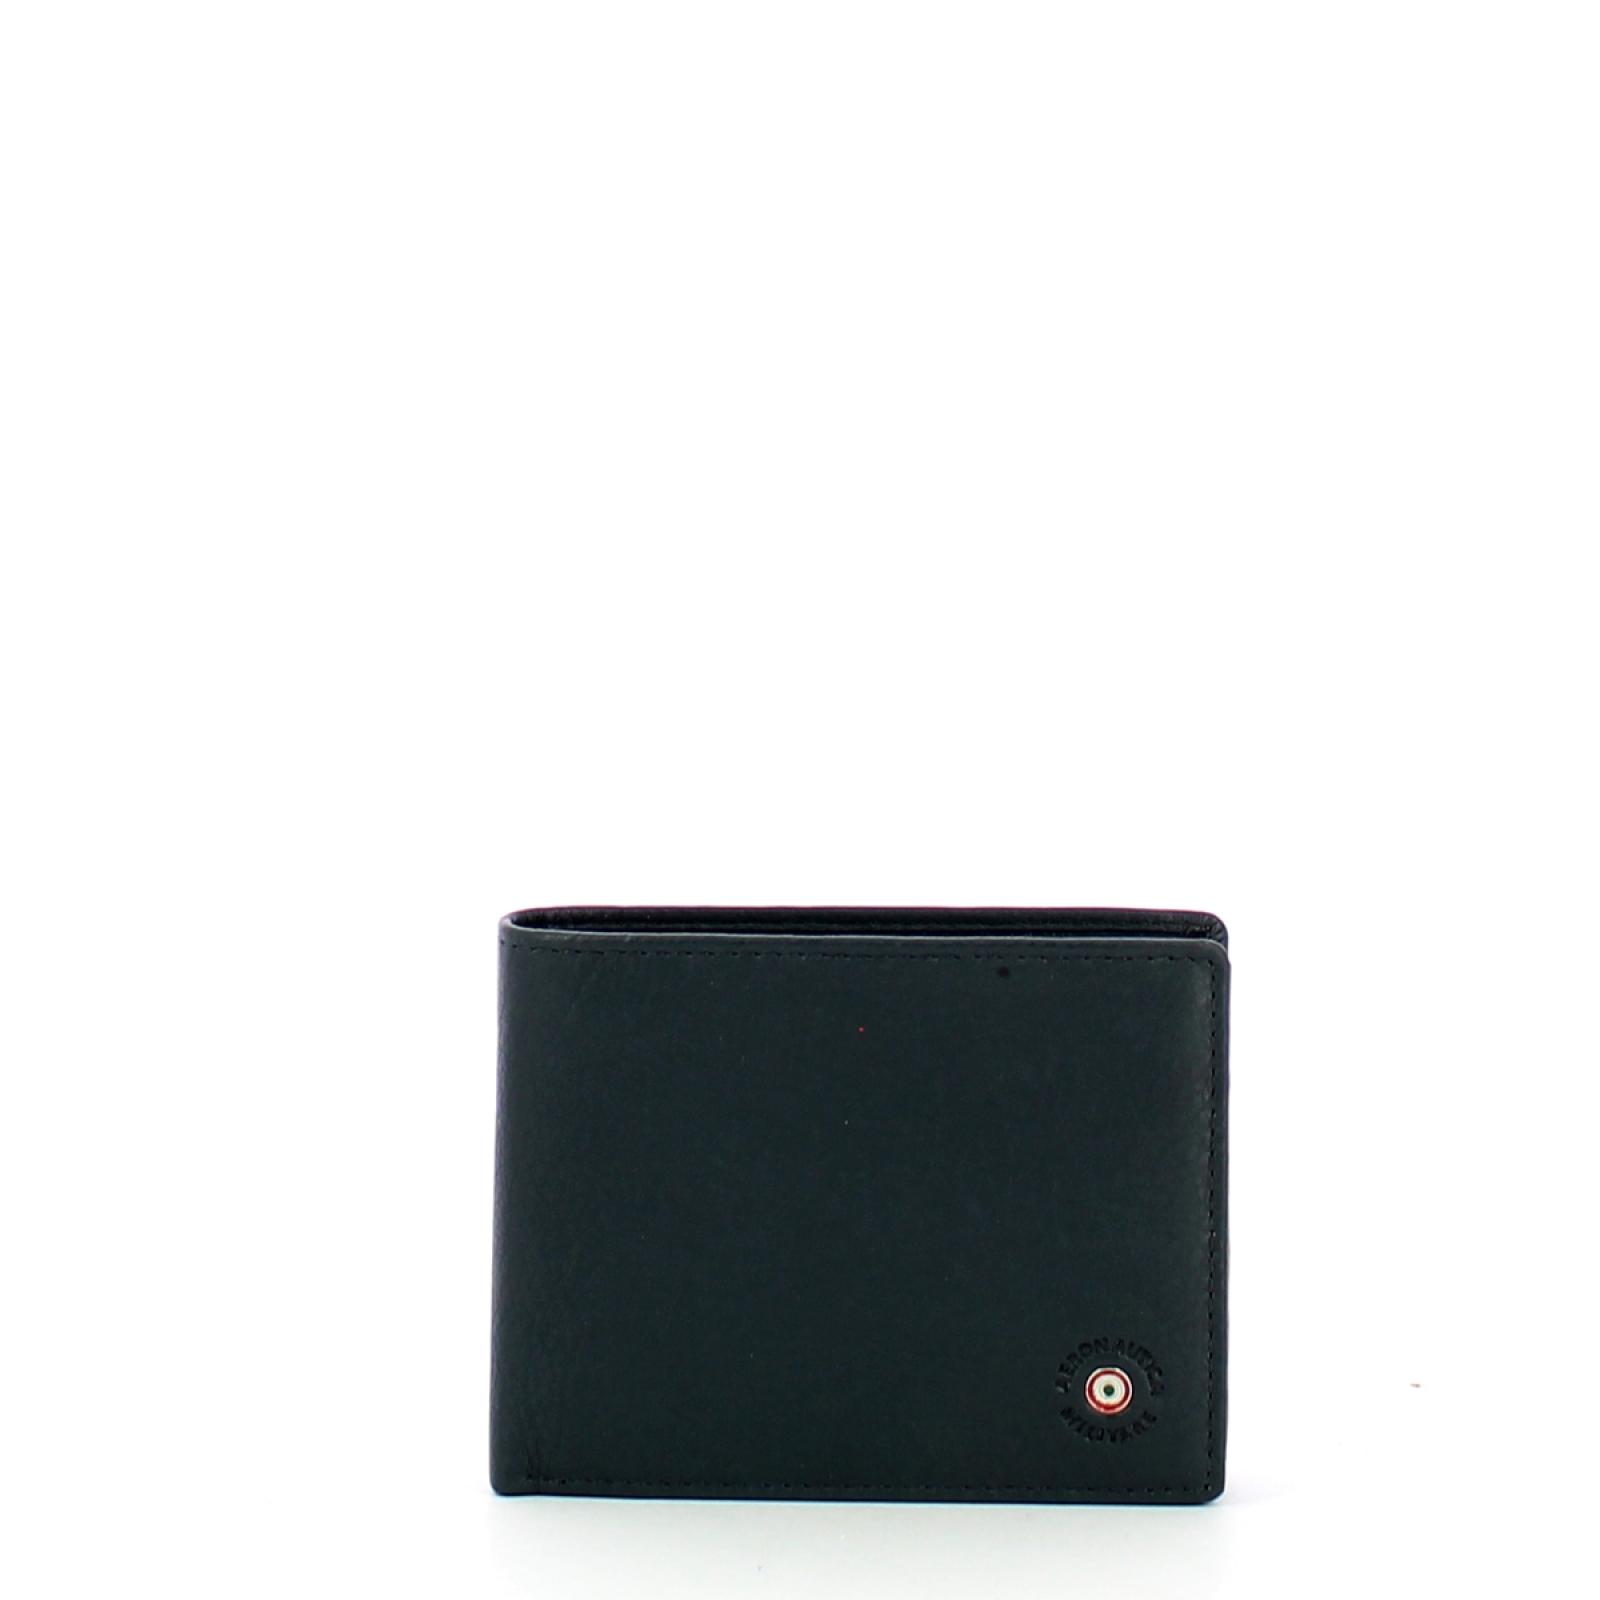 Aereonautica Militare Men wallet with RFID and ID window - 1